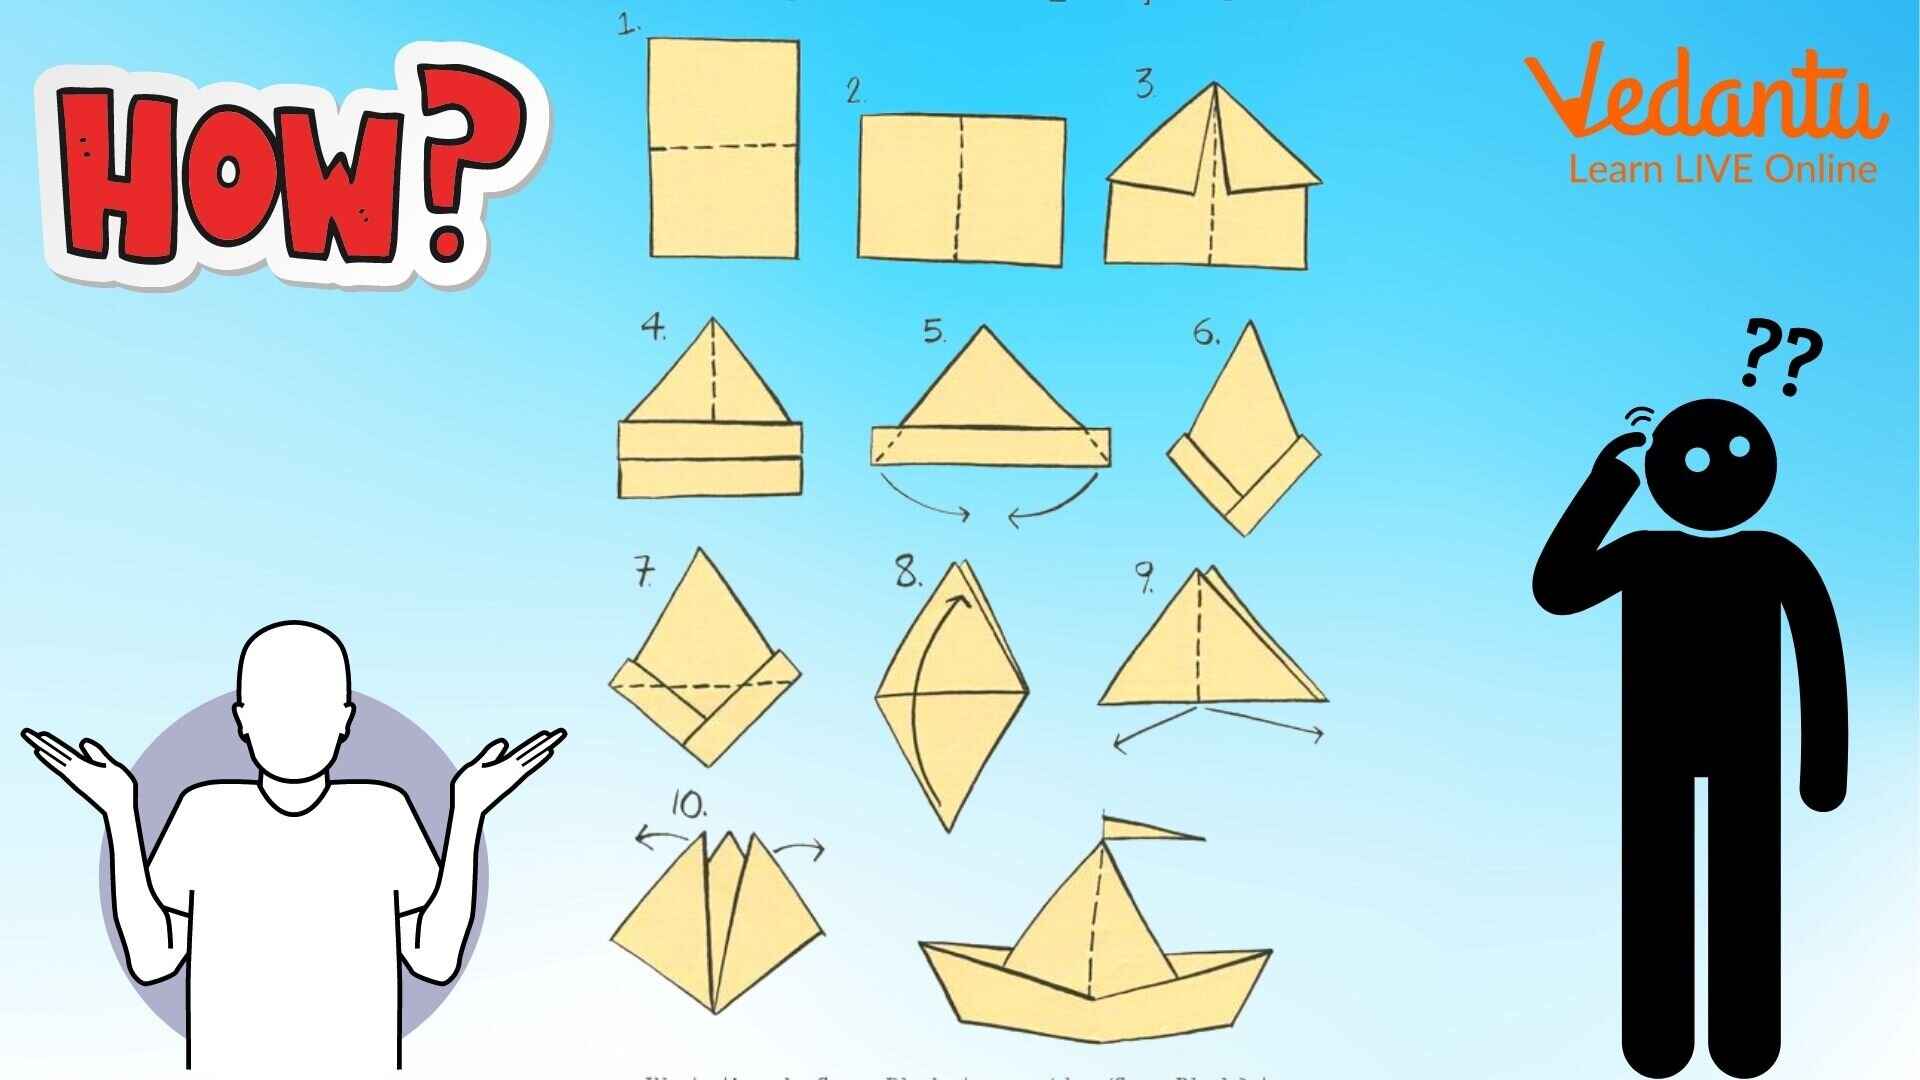 How to Fold a Paper to make Paper Boat